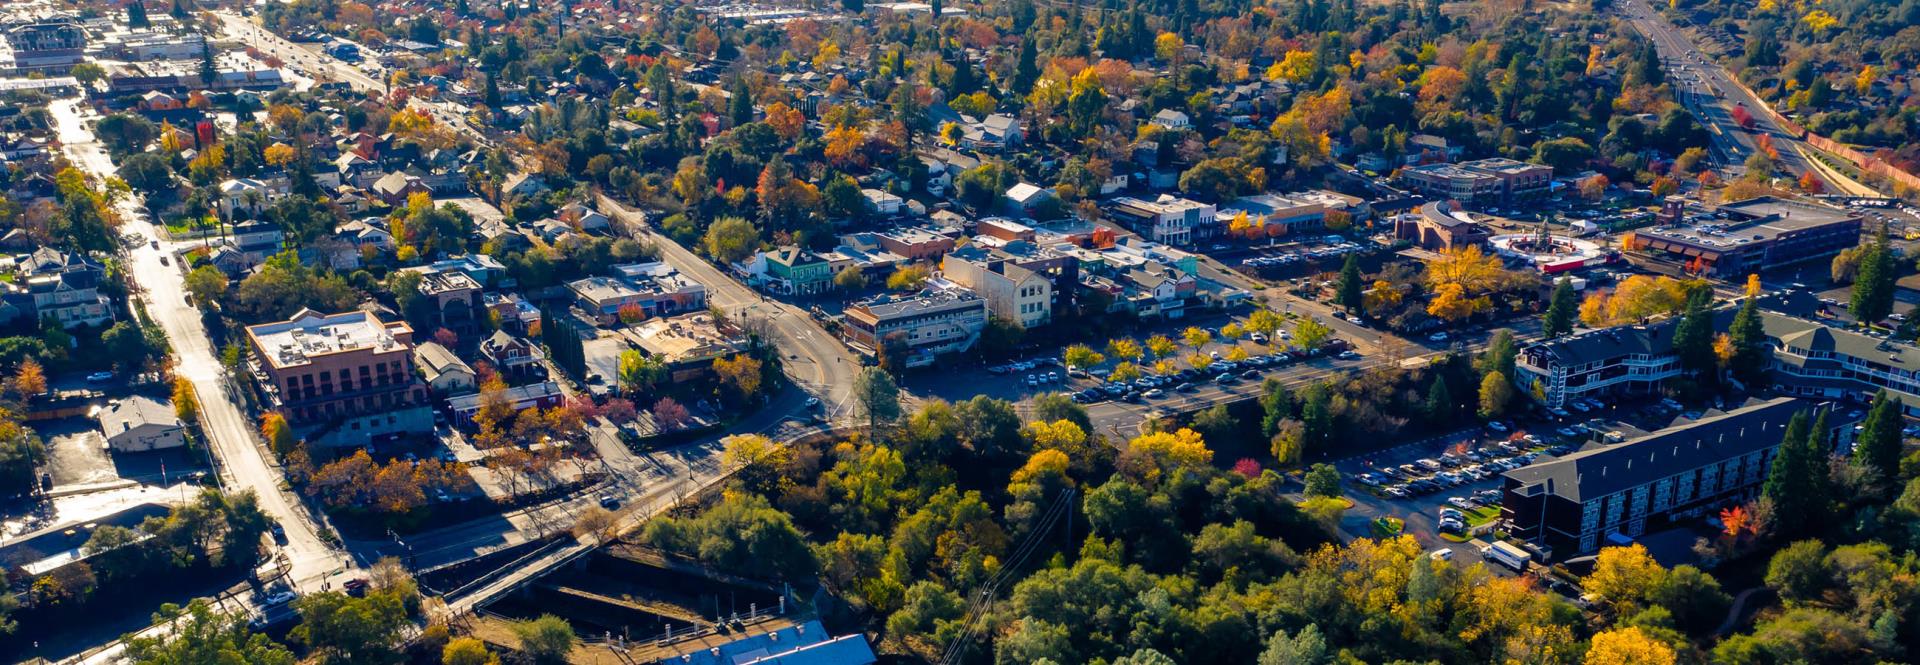 Aerial of the Folsom Historic District. Several businesses, neighborhoods, and streets filled with fall colored trees and cars.